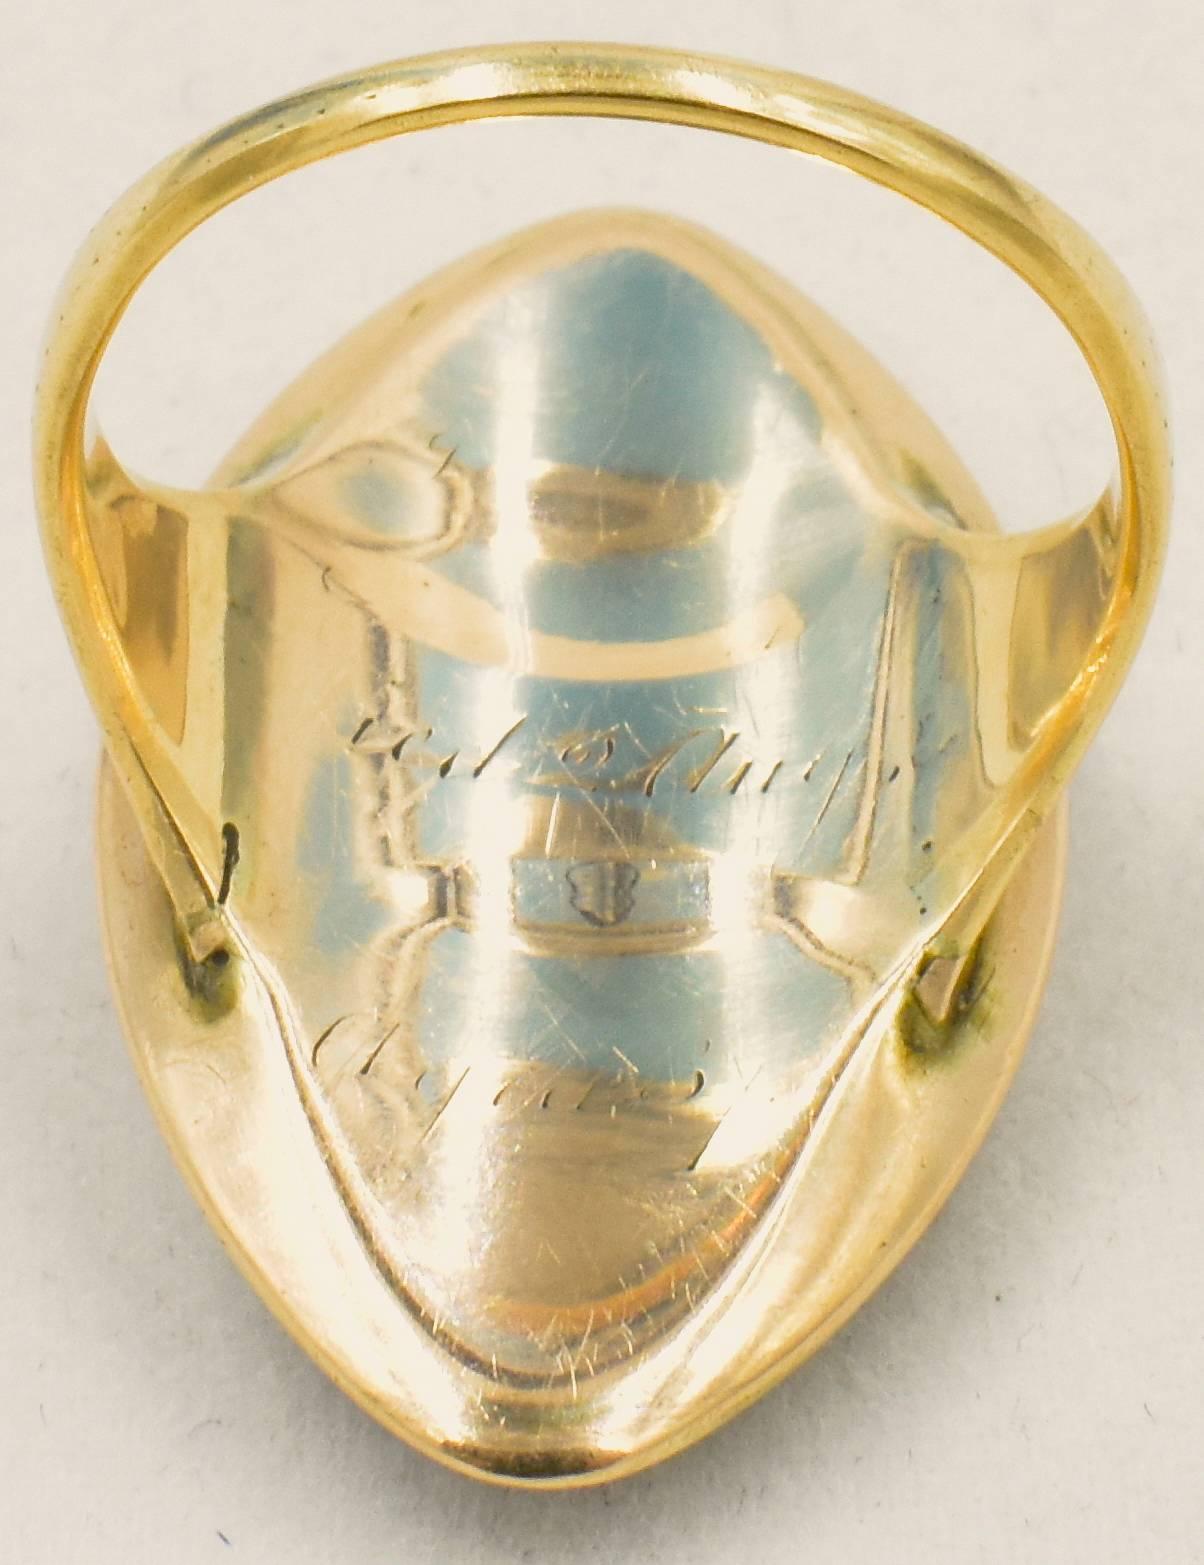 An unusual Georgian navette shaped ring that is a combination of a love ring and a mourning ring, mounted in 15K ring with a plaque of royal blue guilloche enamel surmounted with old cut diamonds set in a floral and leaf rosebud design. The shank of